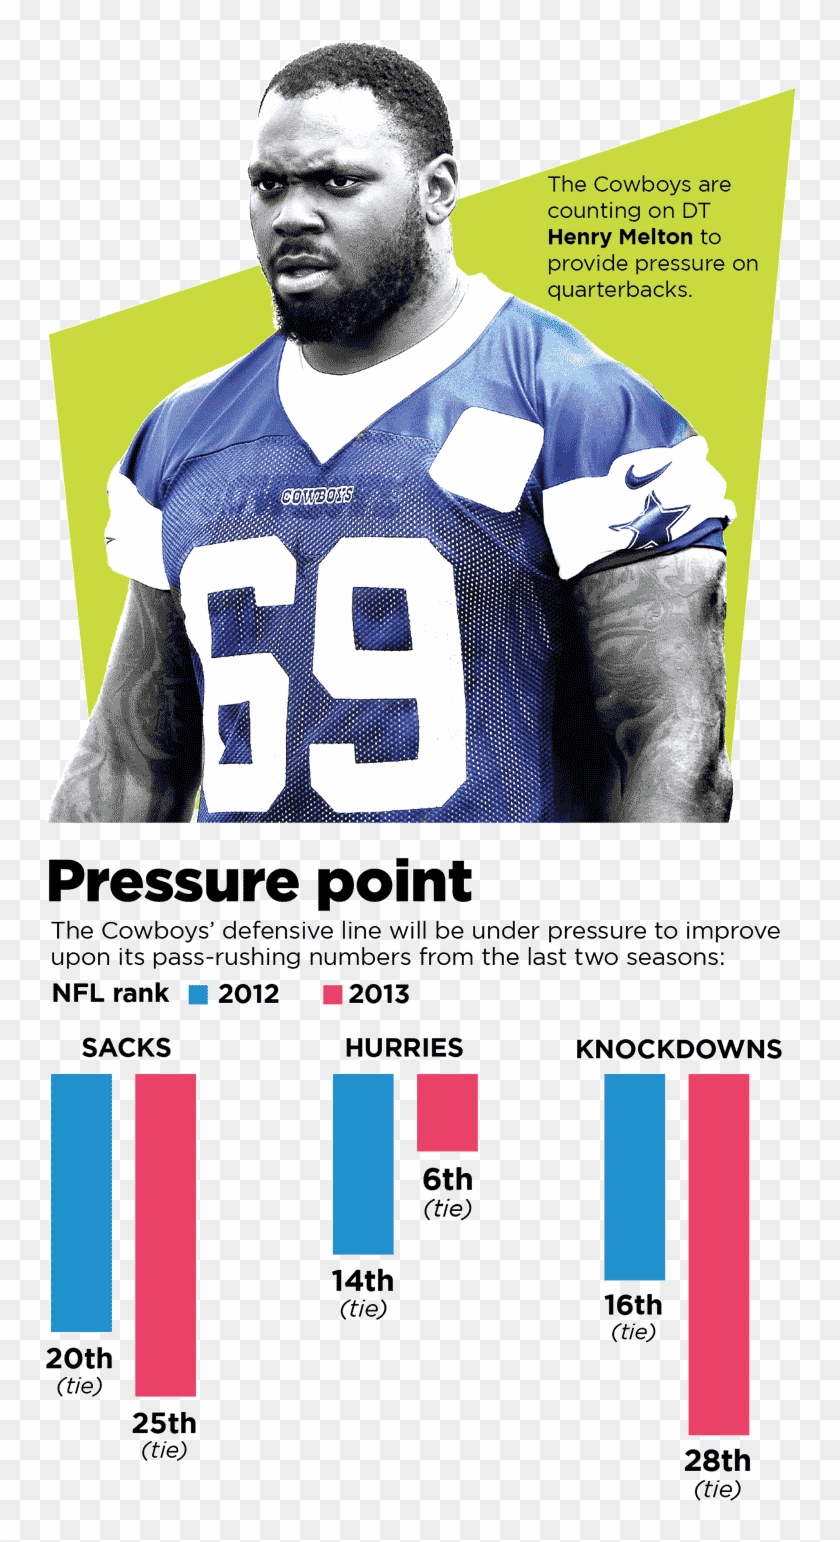 The Cowboys Defensive Line Will Be Under Pressure To - American Football Clipart #5522132